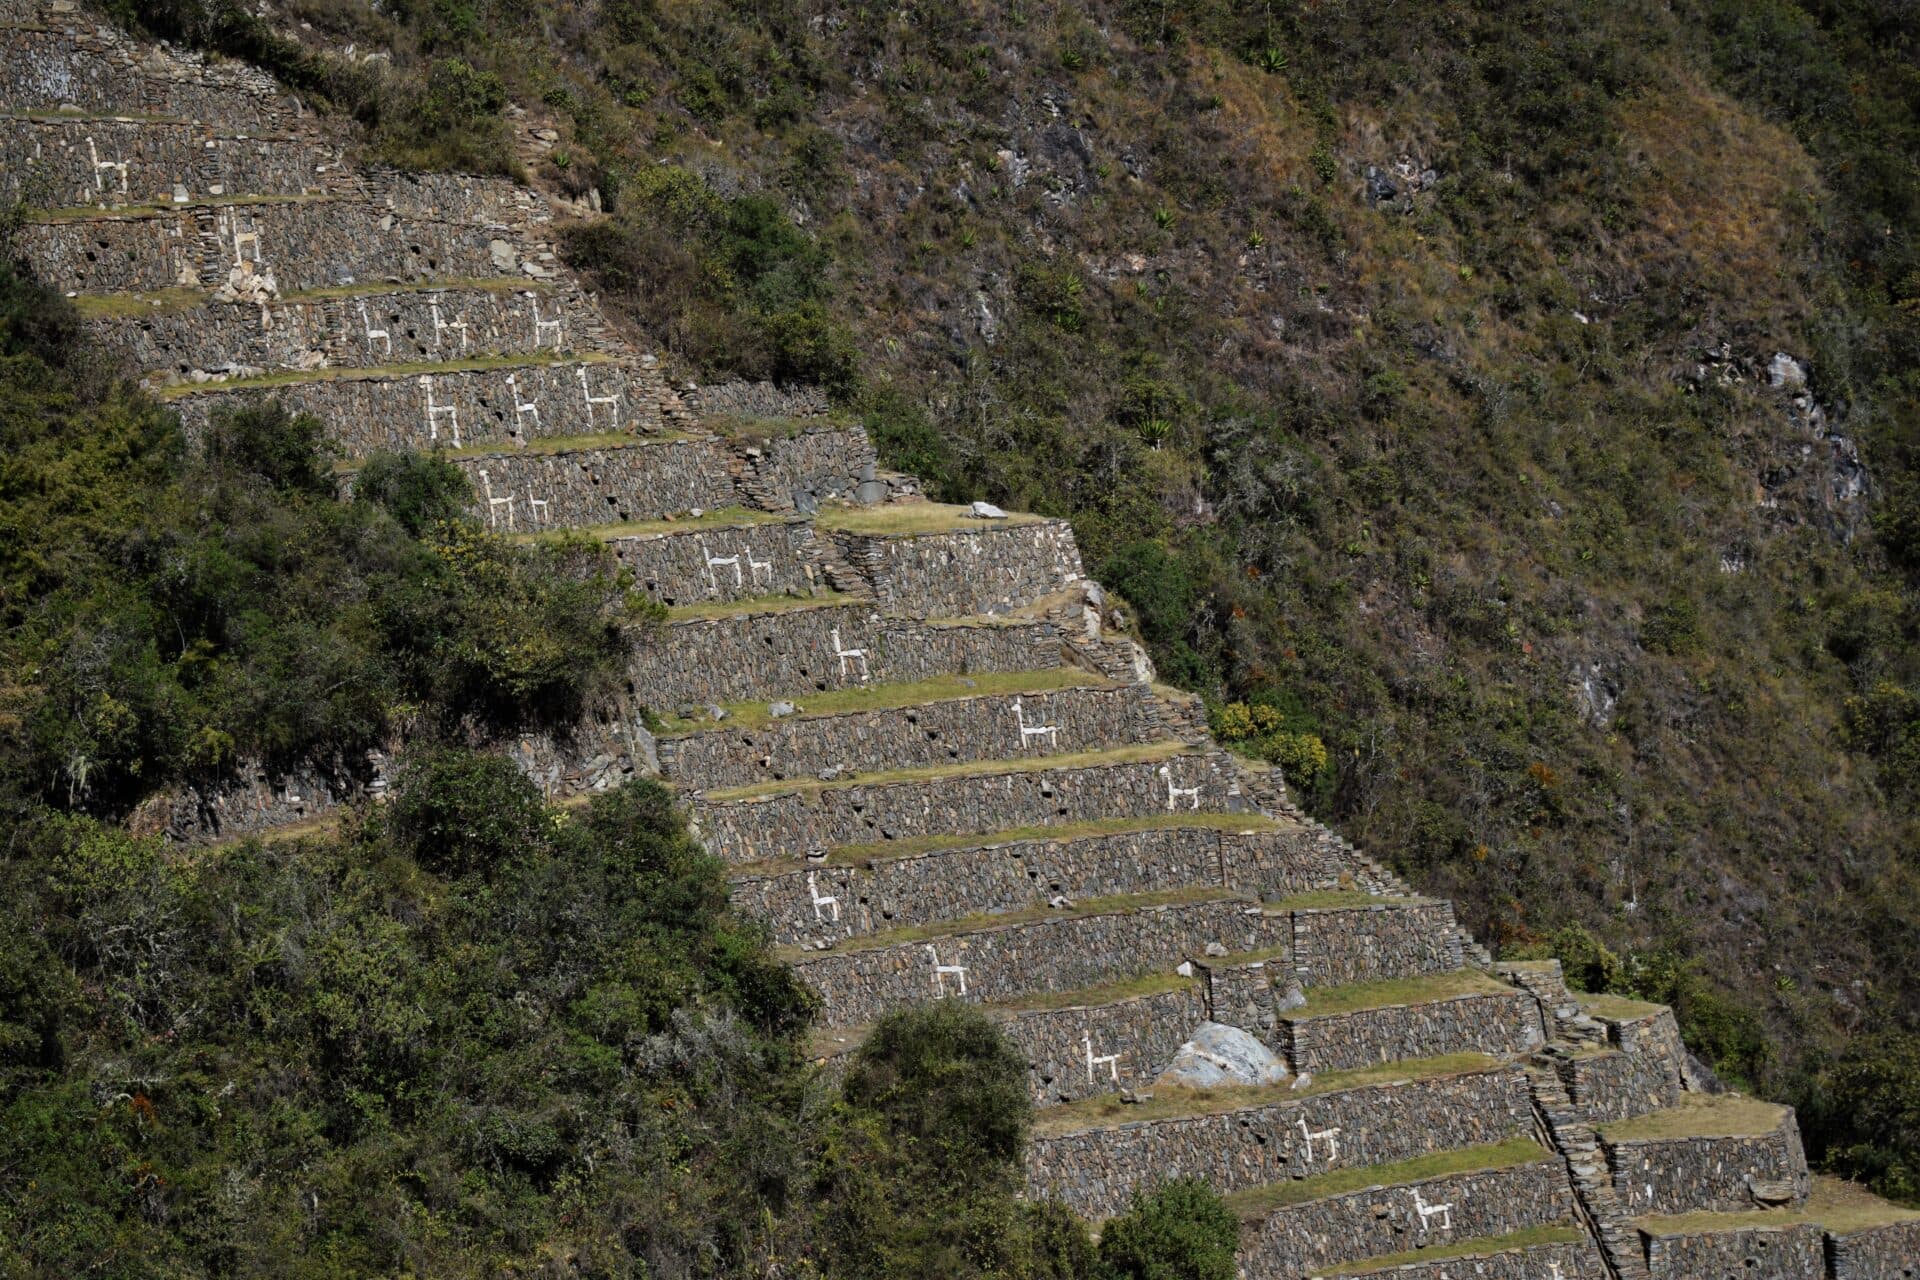 terraces leading down a steep mountain slope, decorated with depictions of llamas made of white stone